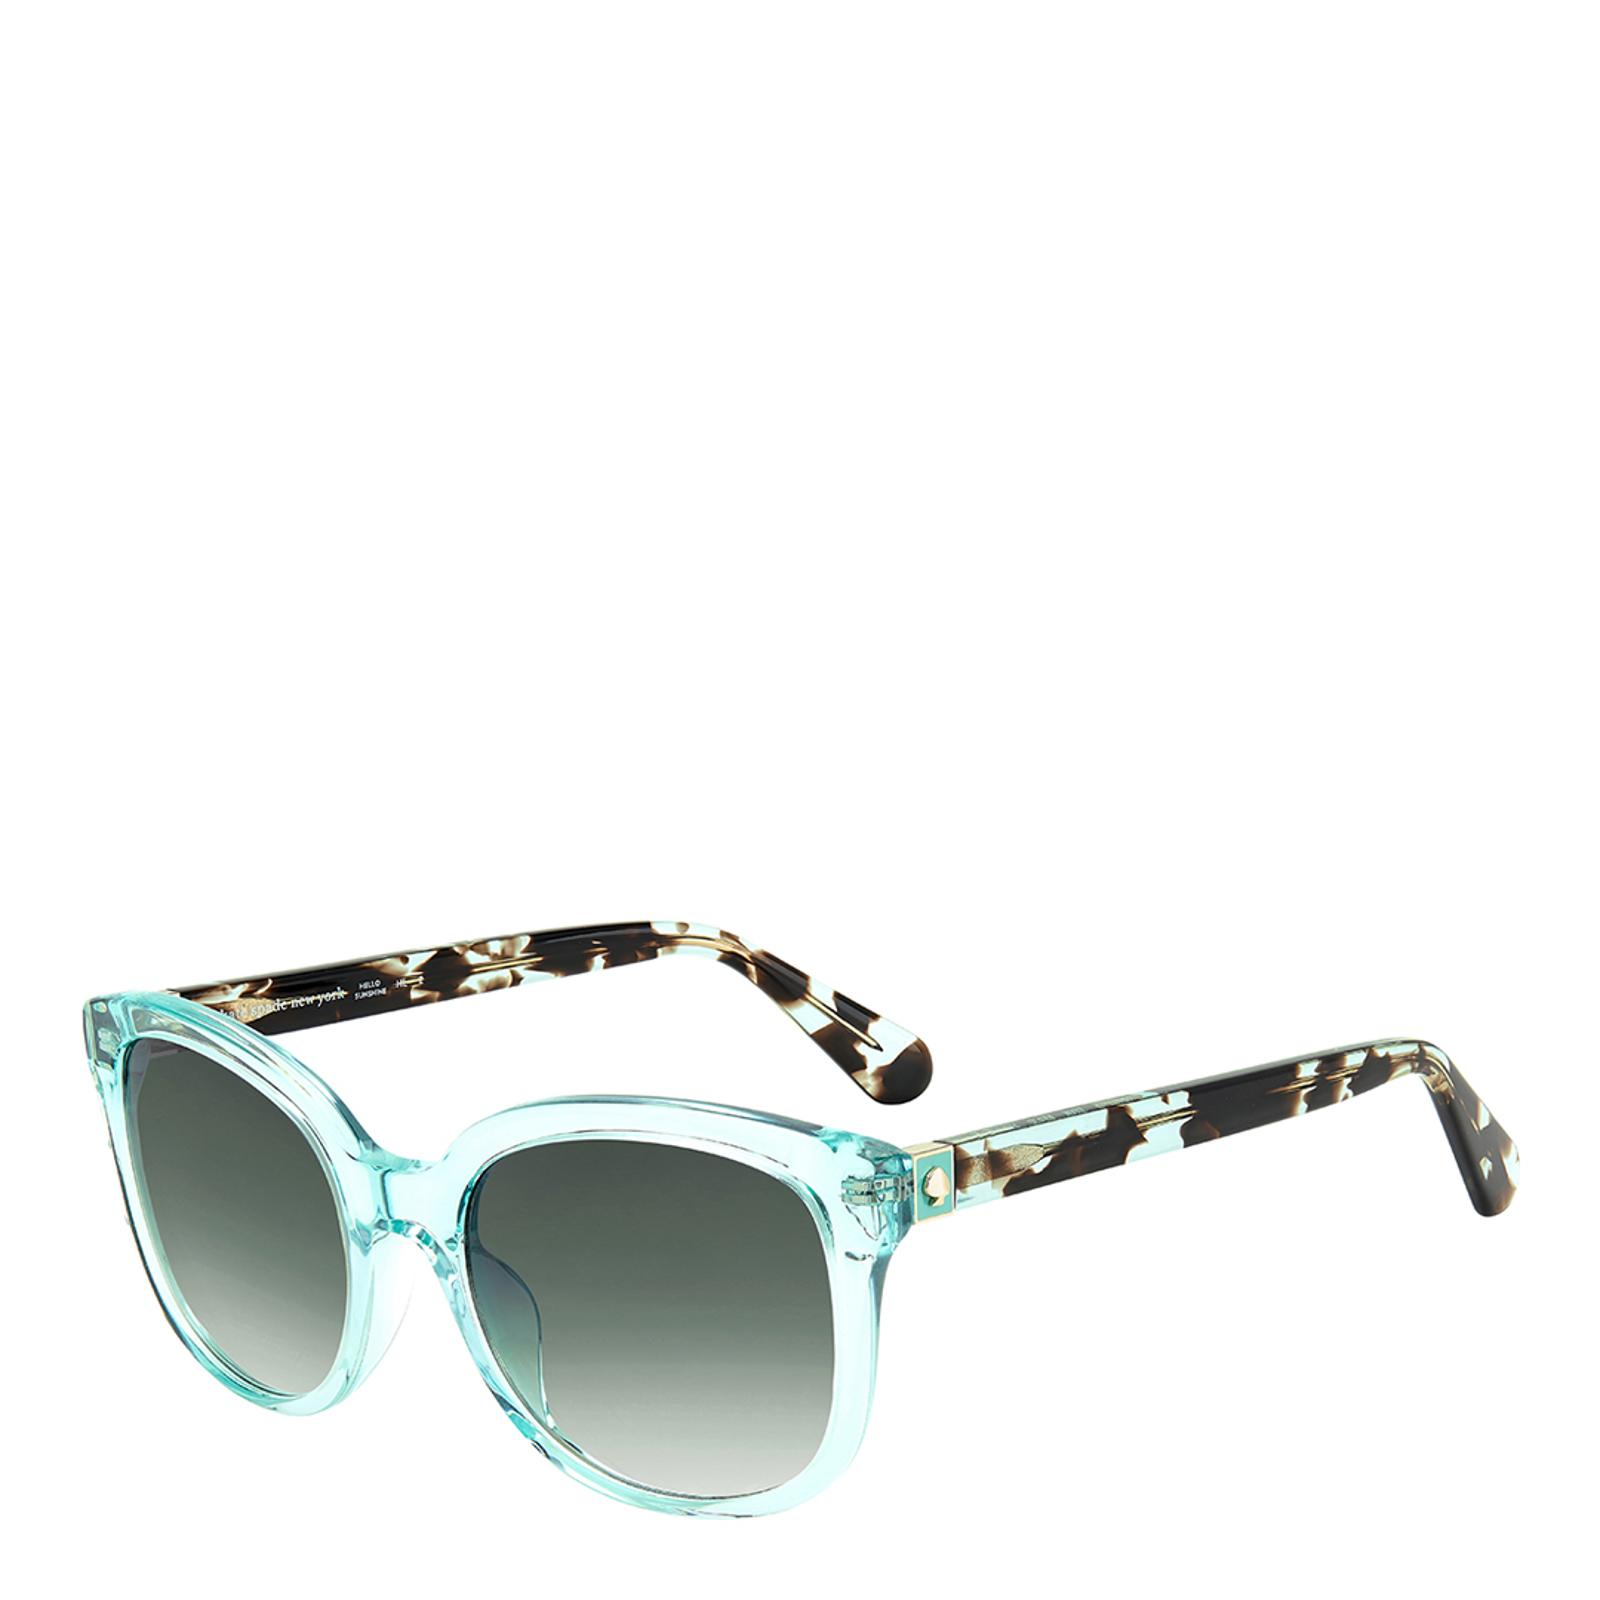 Teal Square Sunglasses - BrandAlley